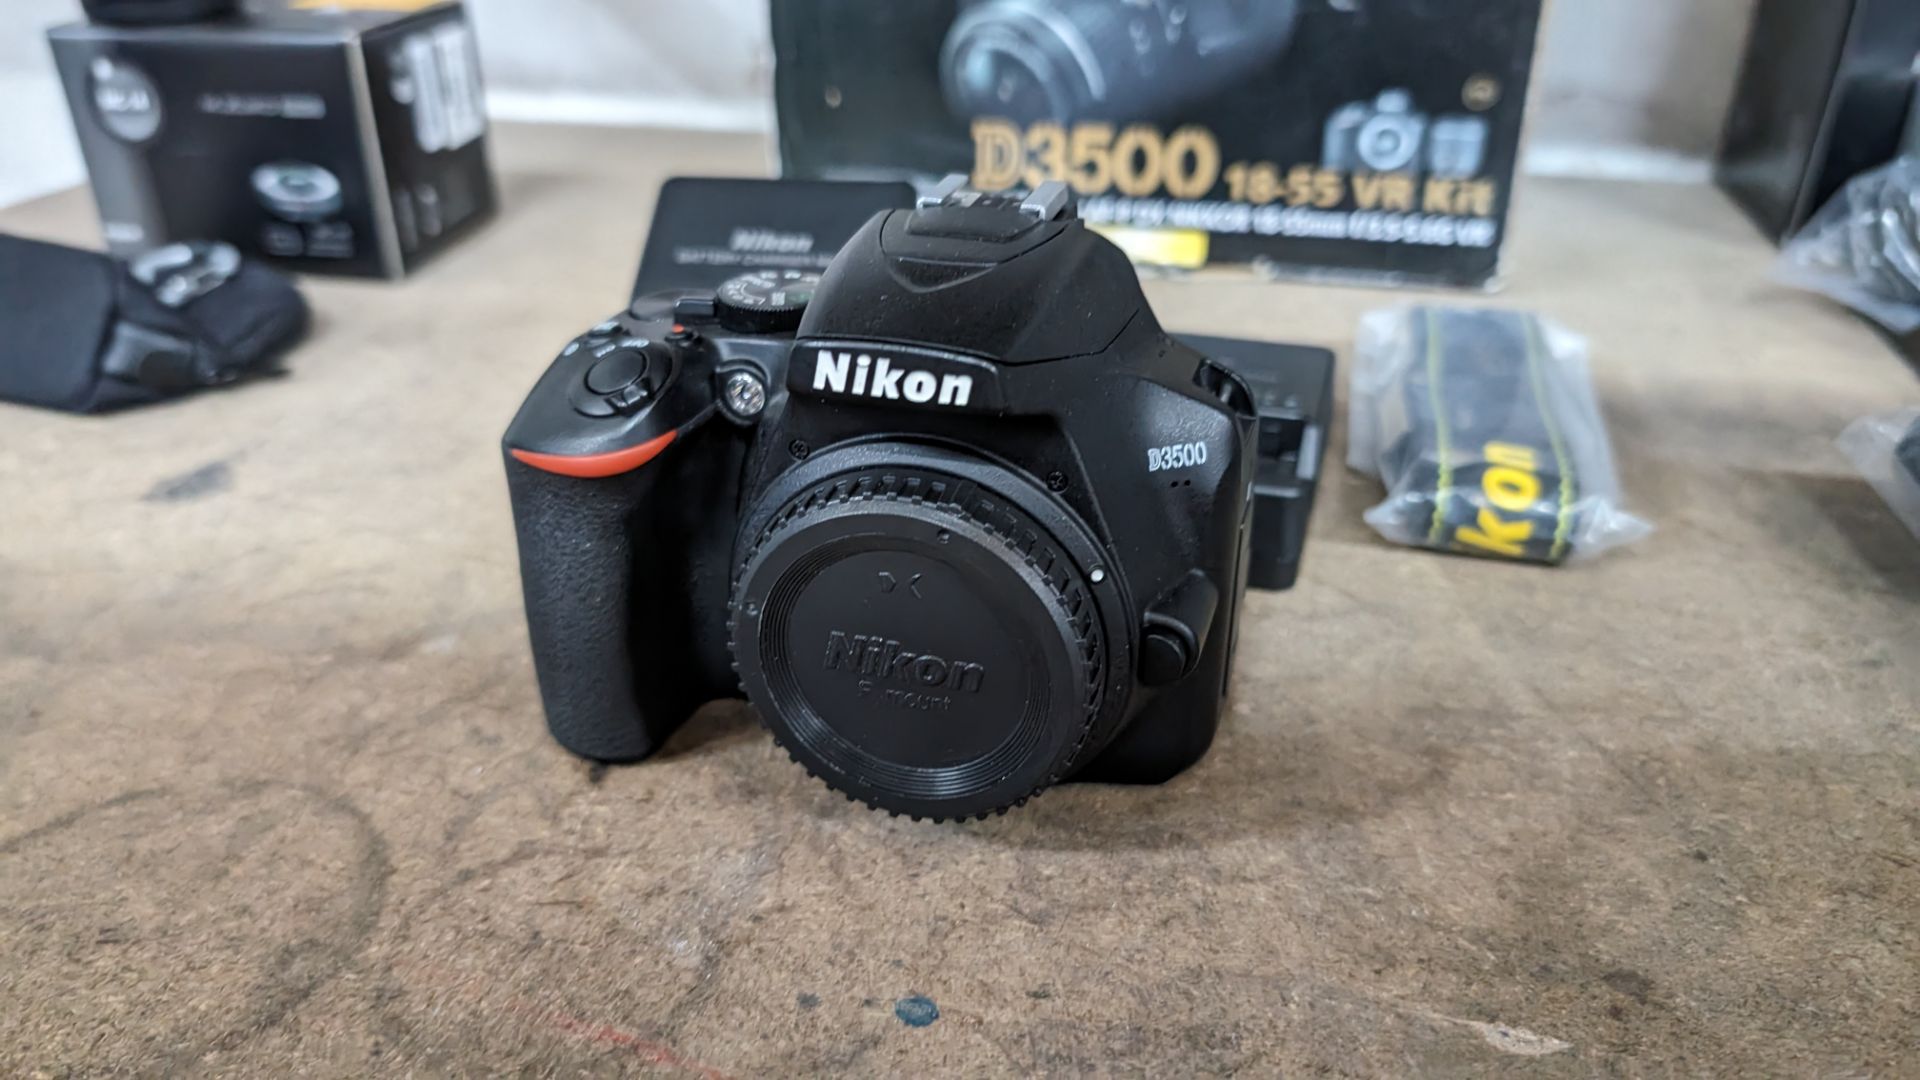 Nikon D3500 camera. Although this camera is in a box for a kit including a lens, this lot just comp - Image 2 of 8